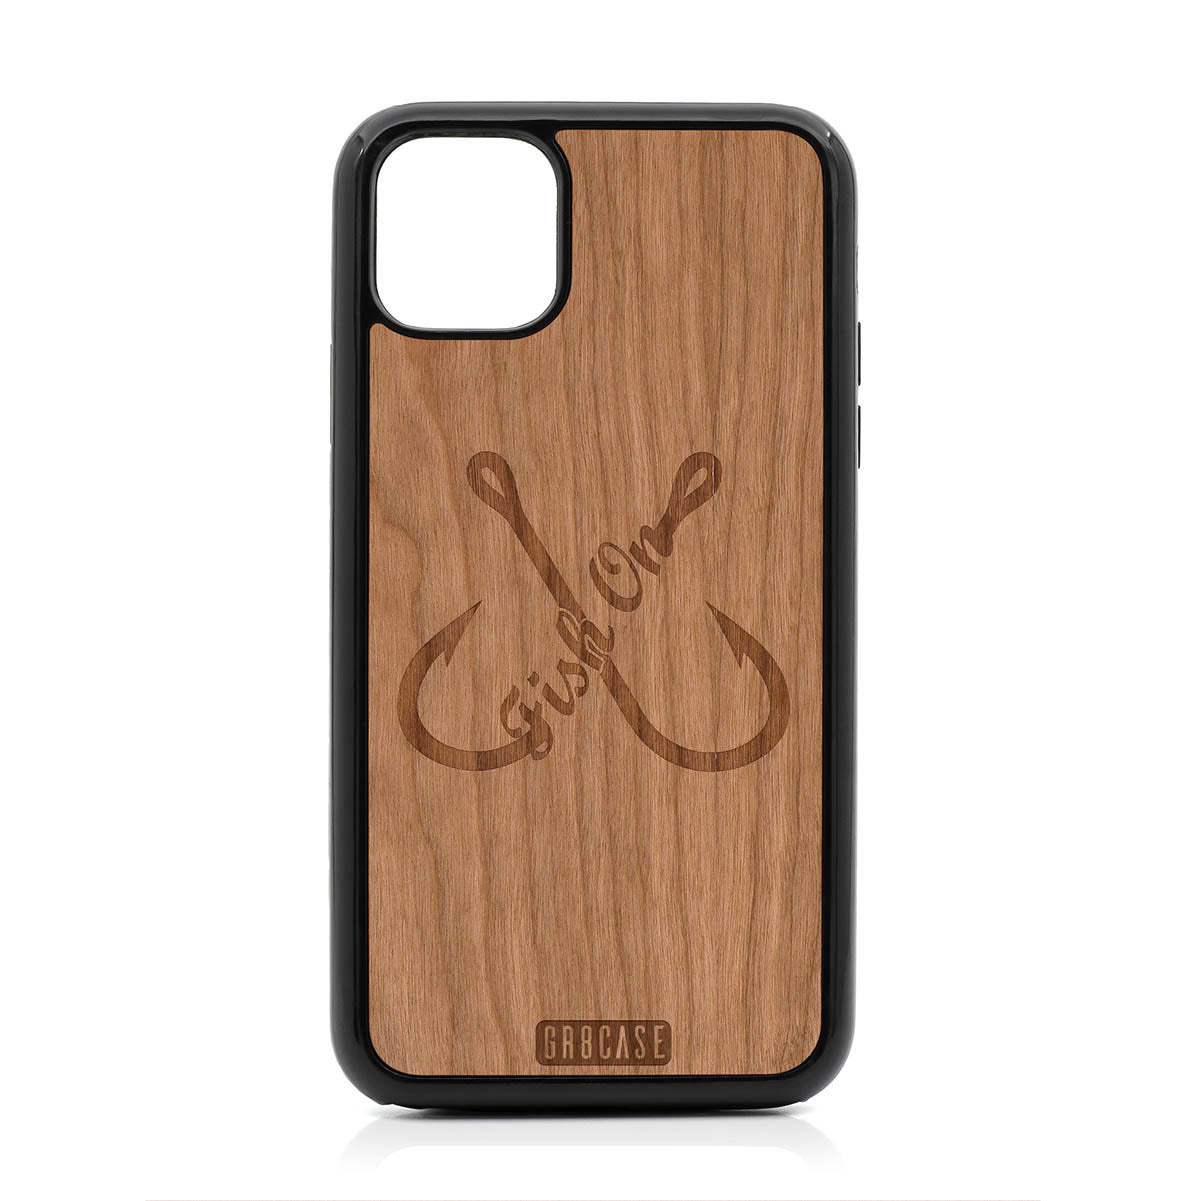 Fish On (Fish Hooks) Design Wood Case For iPhone 11 Pro Max by GR8CASE